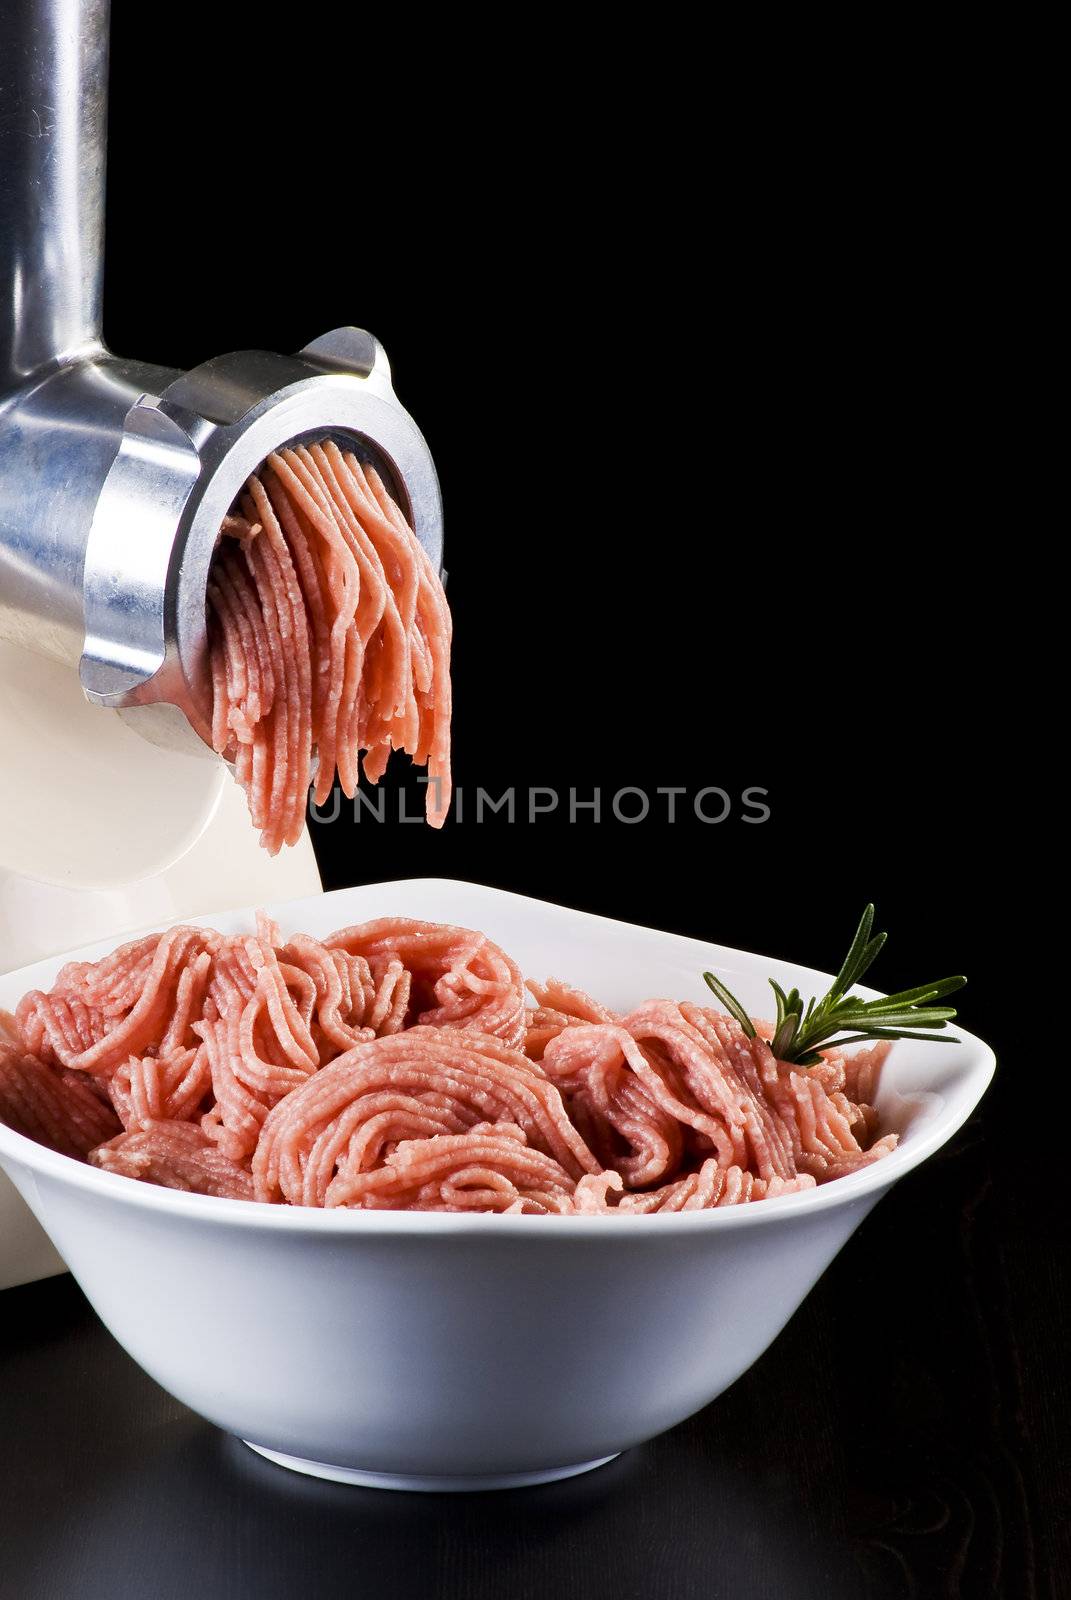 Mince and meat grinder by caldix